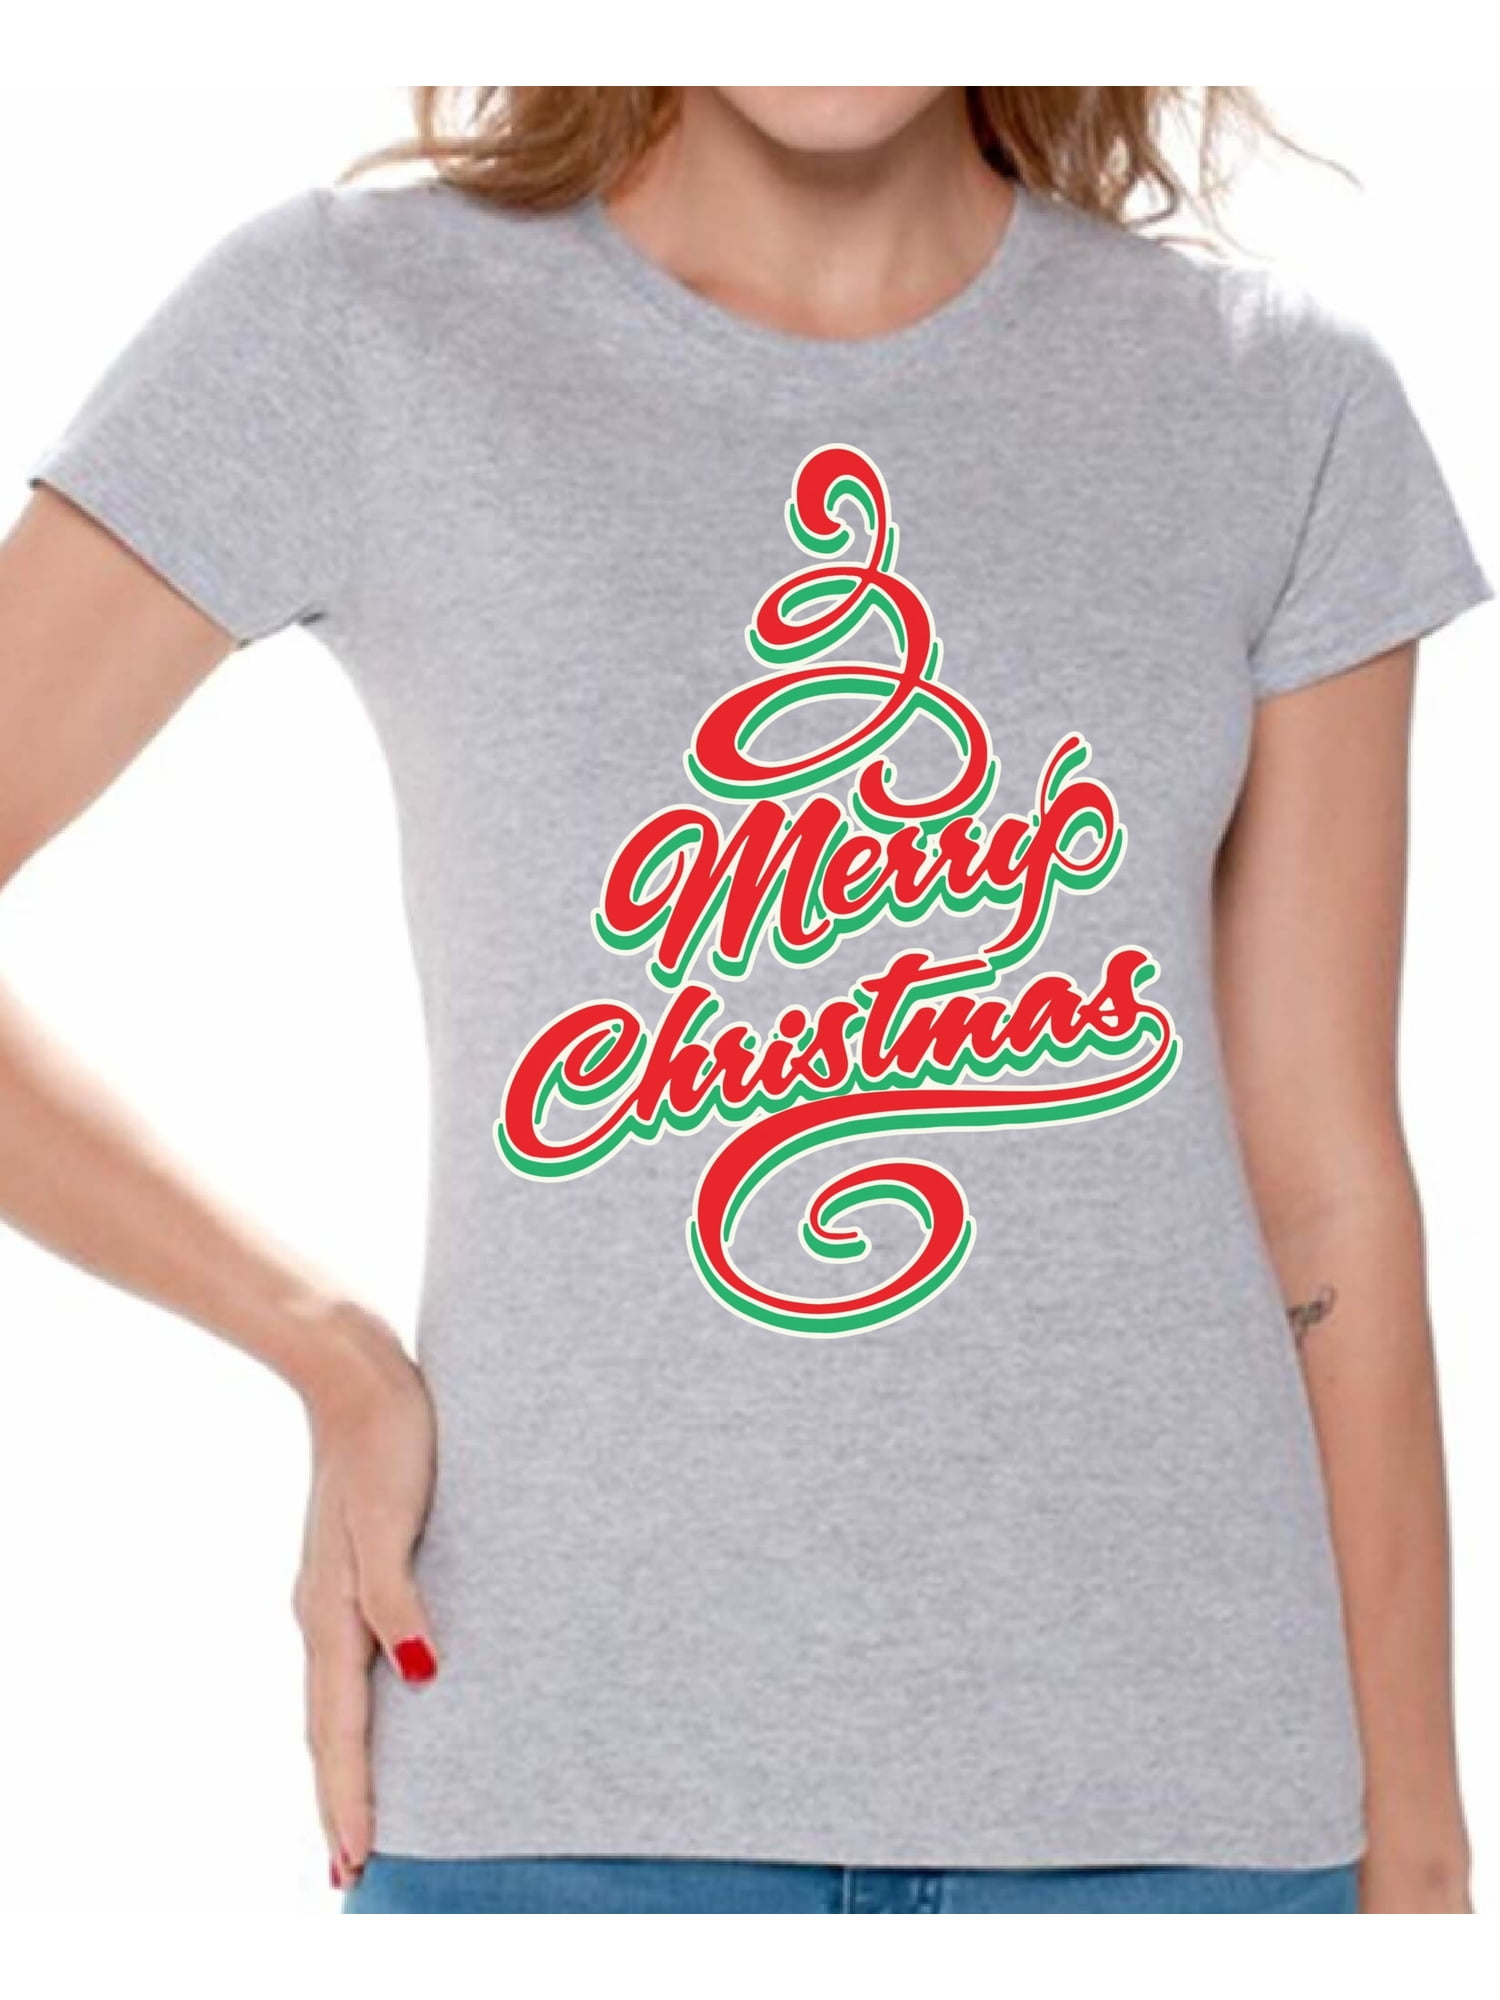 Merry Christmas AF Shirt Women's Holiday Top Merry Christmas Shirts for Women 